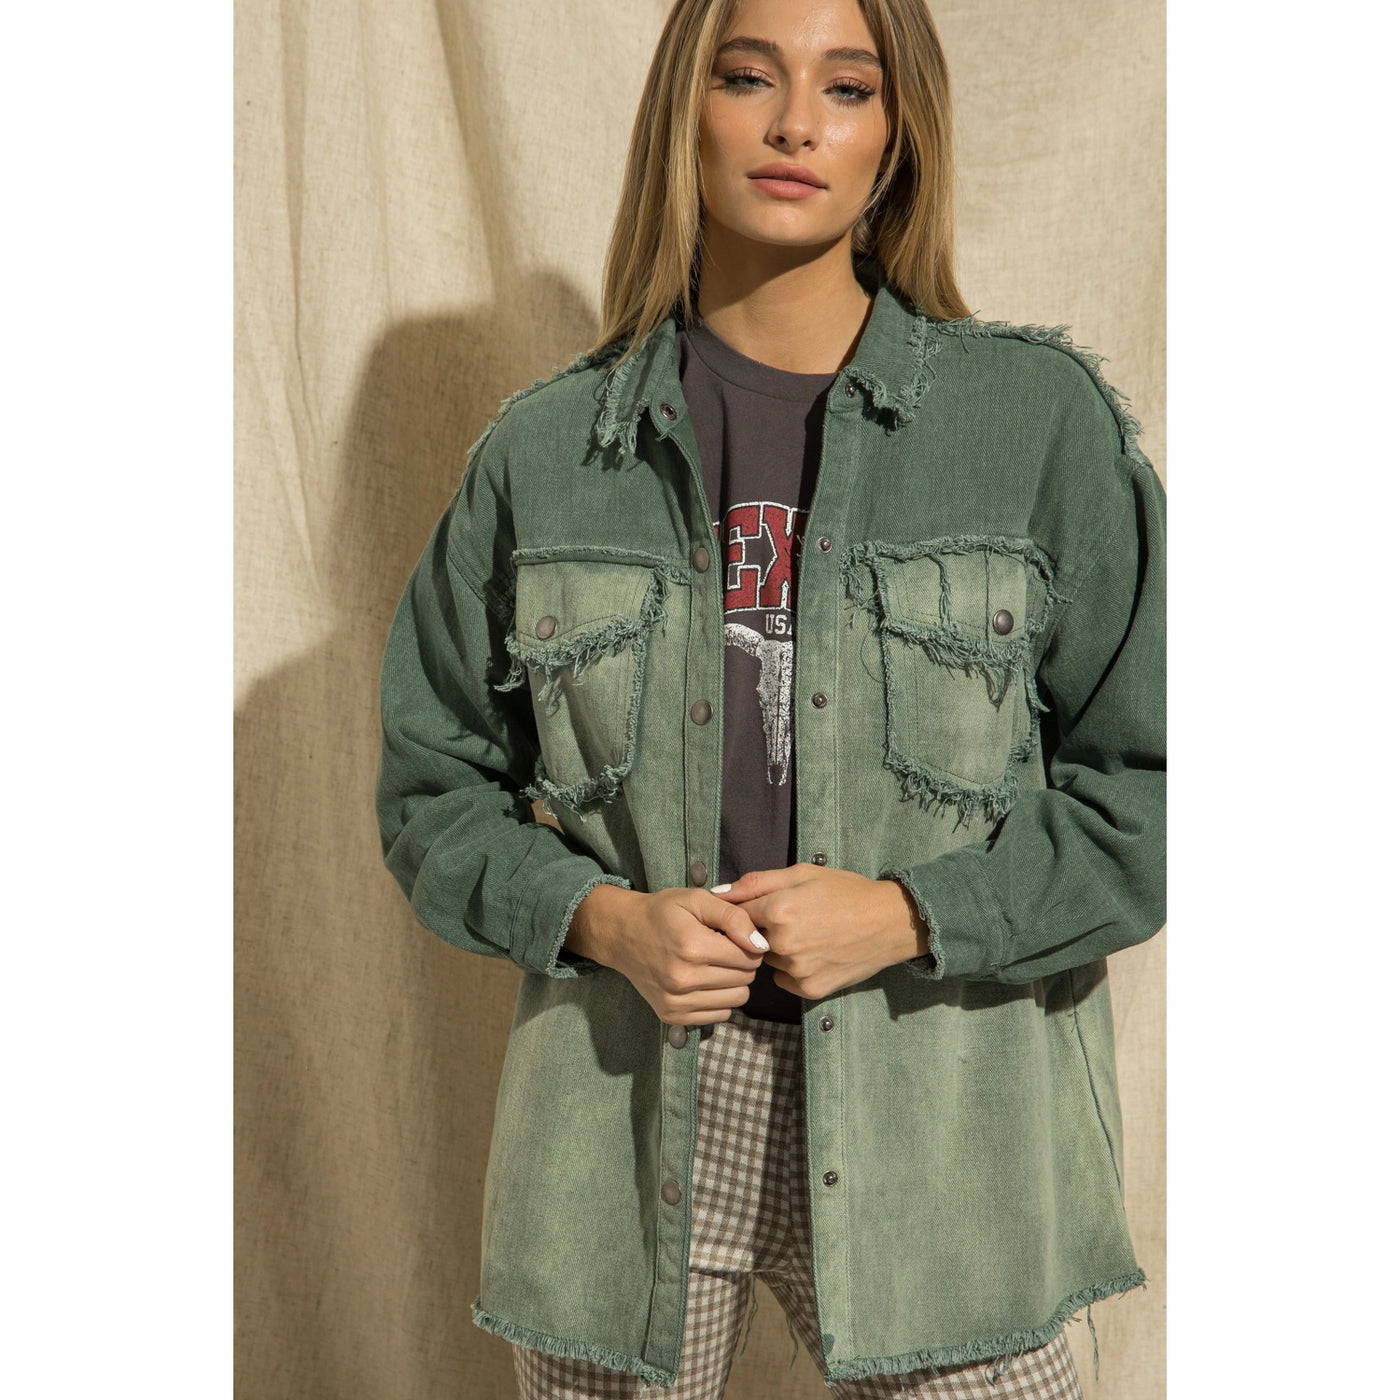 jade button up jacket with distressed hem detail